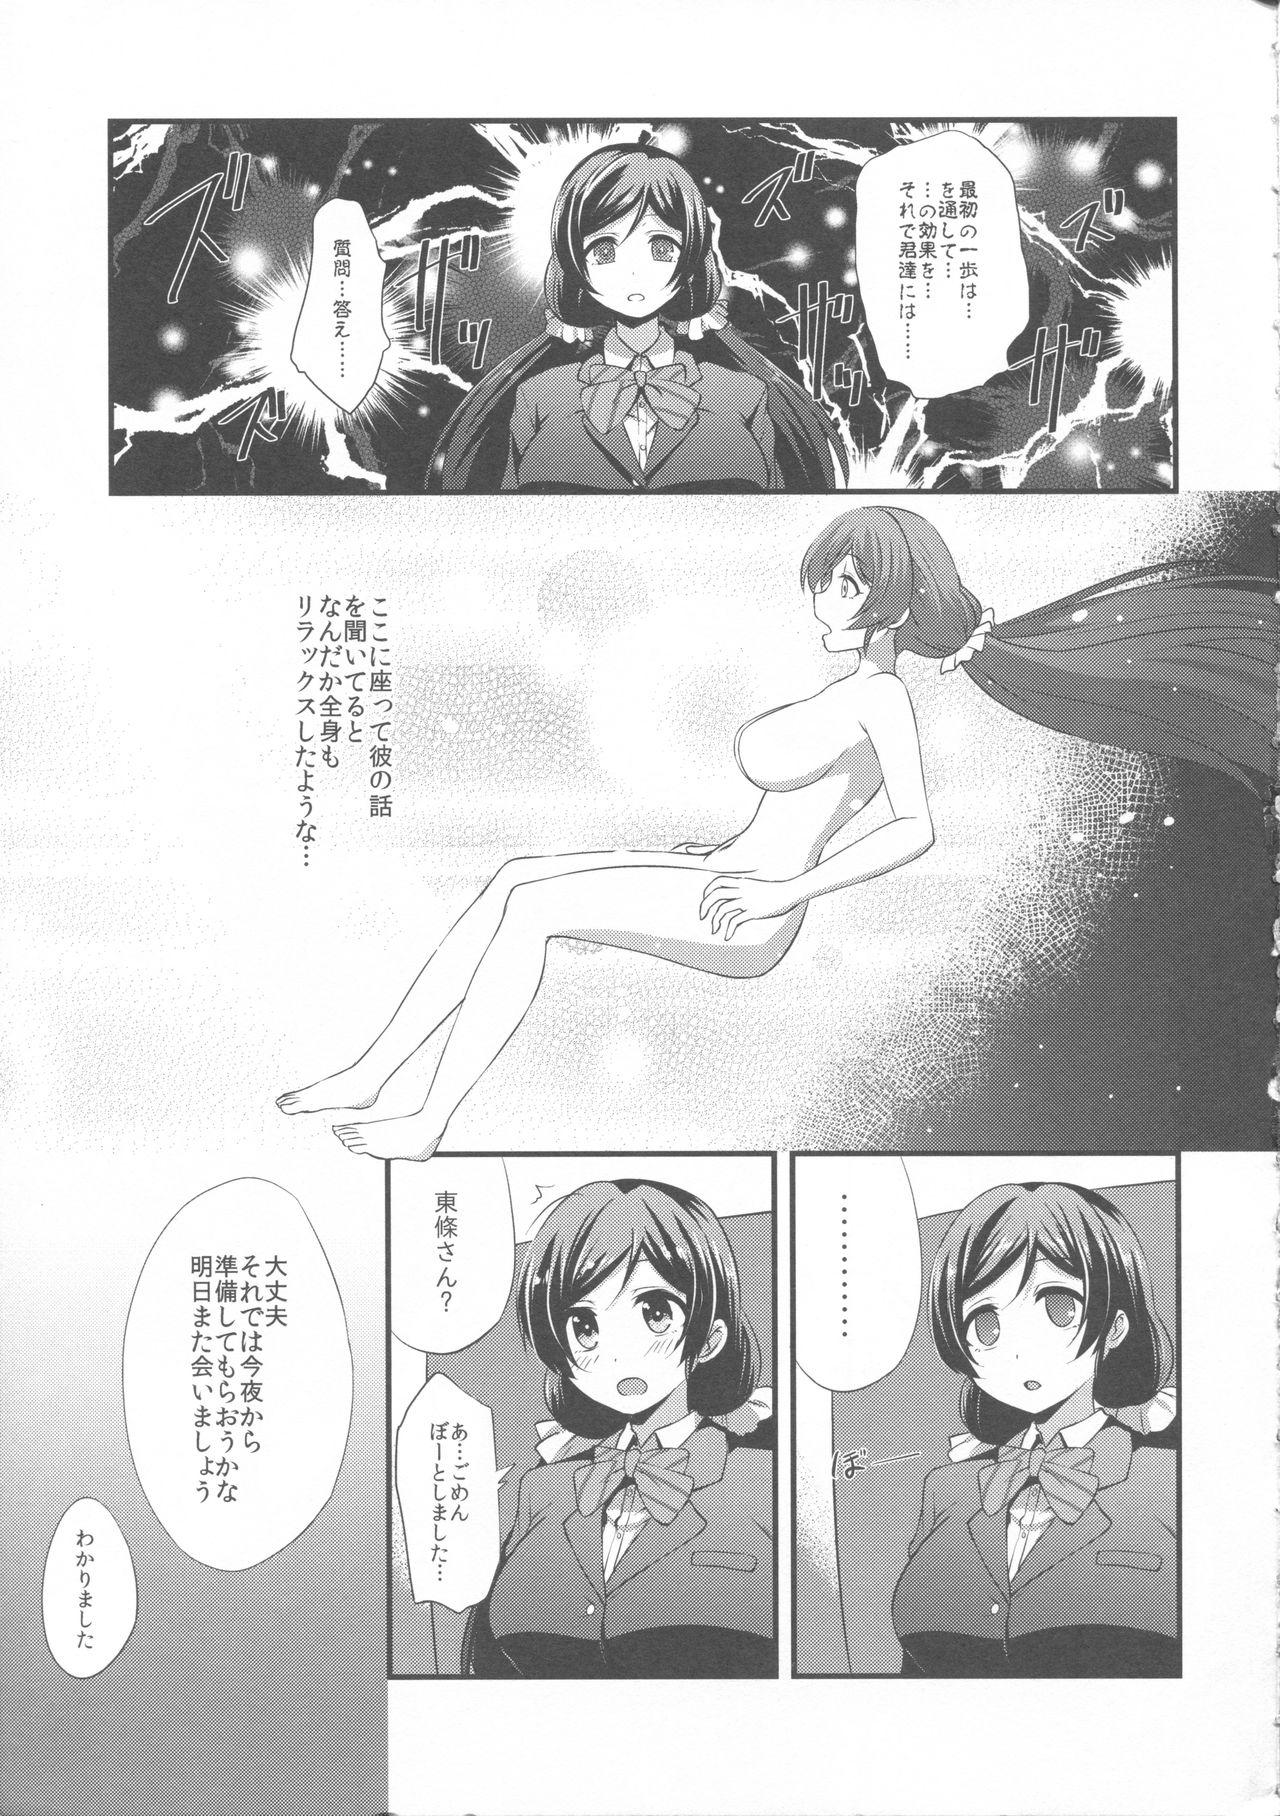 Hot BAD END HEAVEN 4 - Love live Work - Page 4